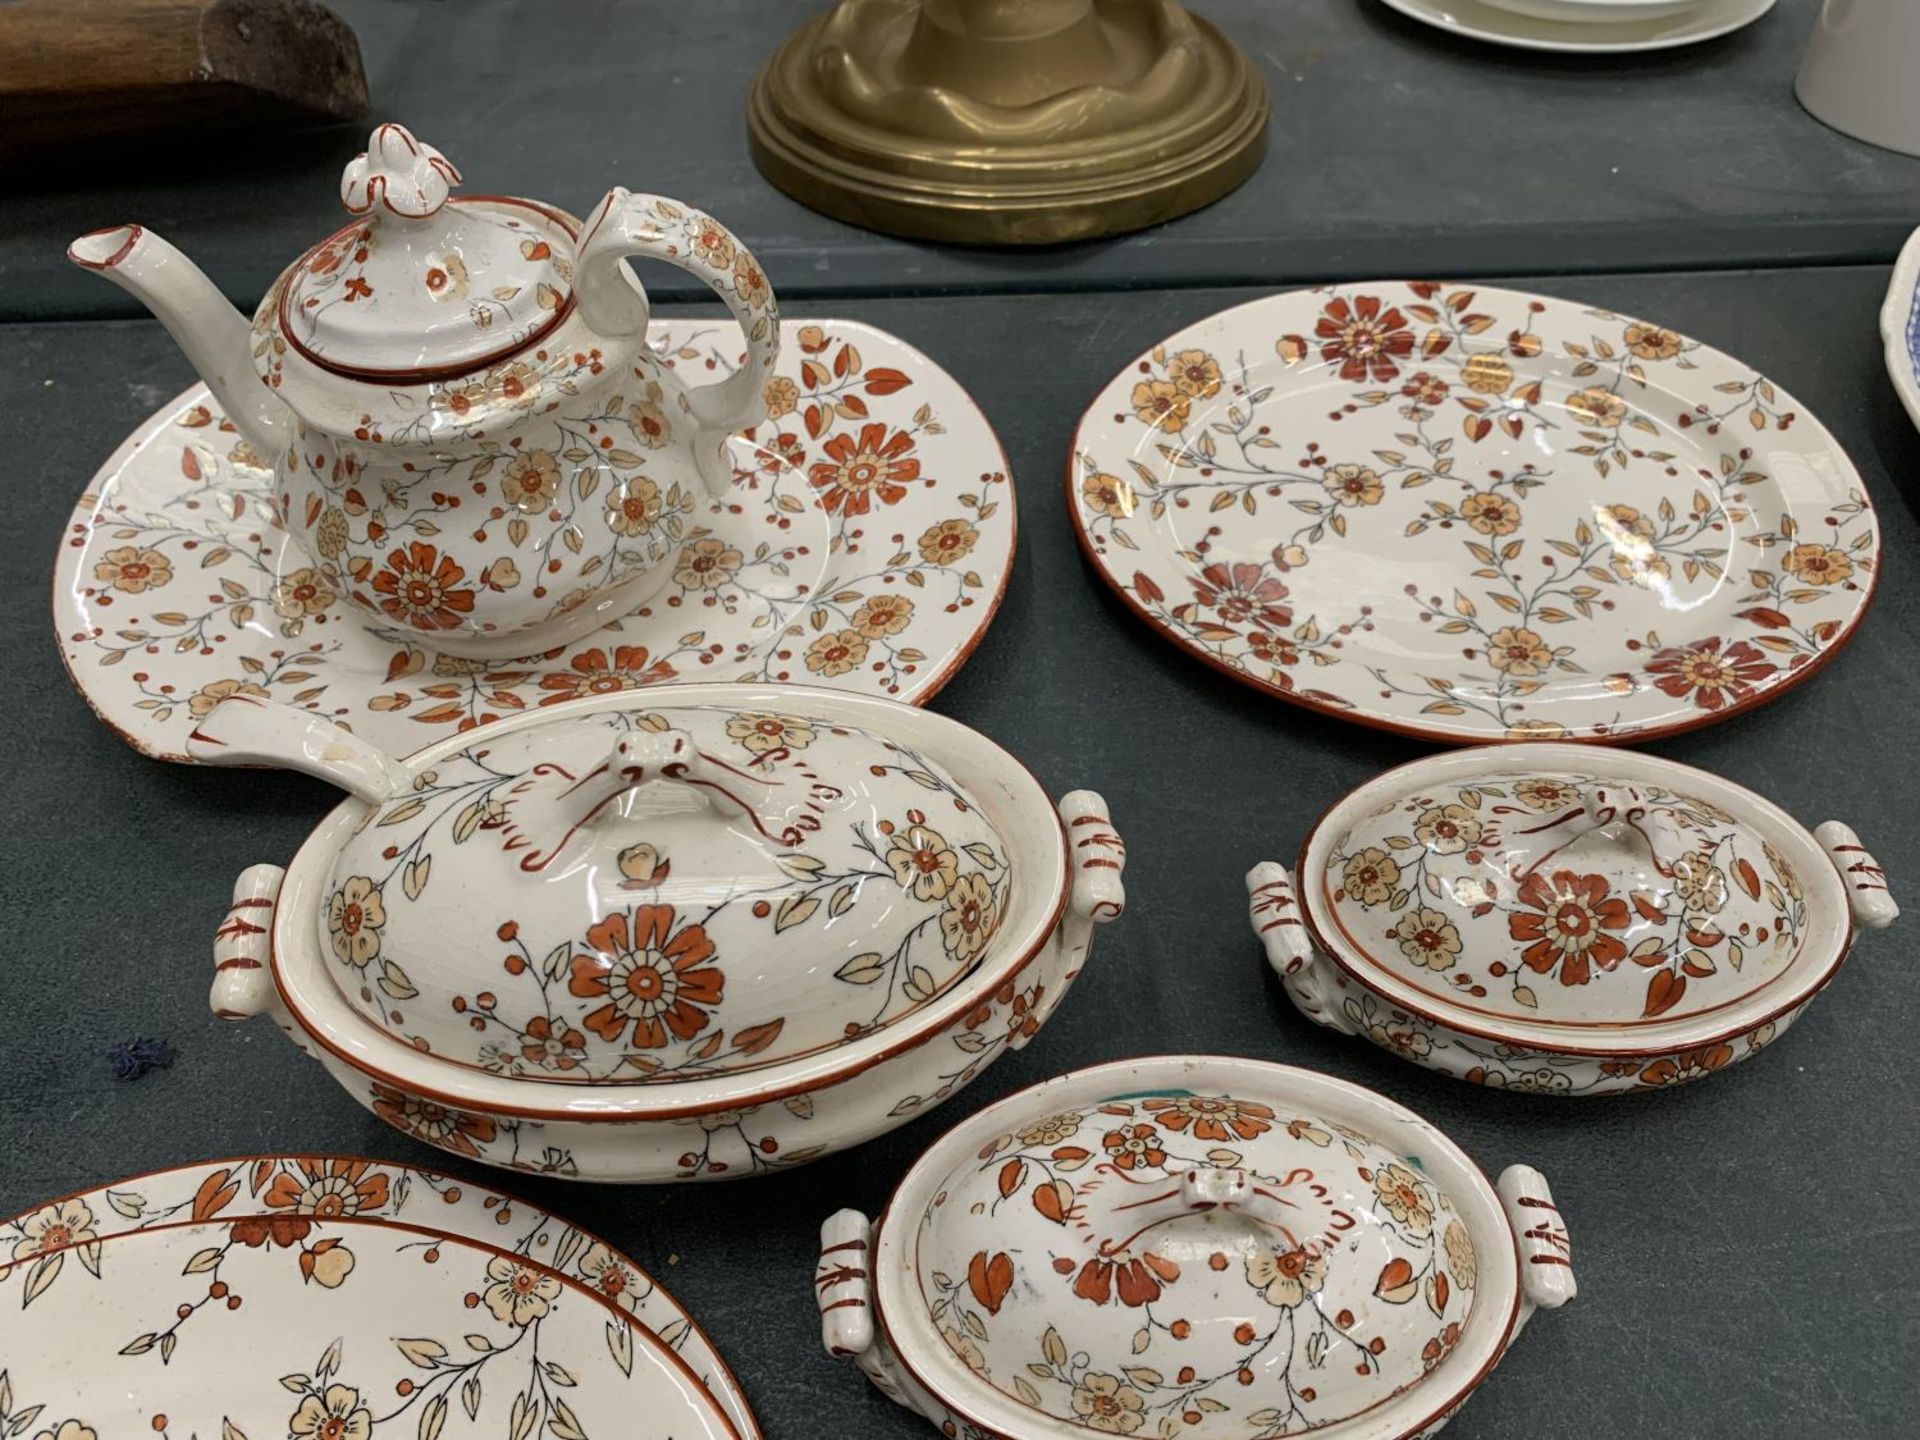 A MINIATURE RIDGWAY'S, STOKE-ON-TRENT, CHILD'S TEA SET 'PERSIA' PATTERN, CIRCA 1880, TO INCLUDE A - Image 2 of 5